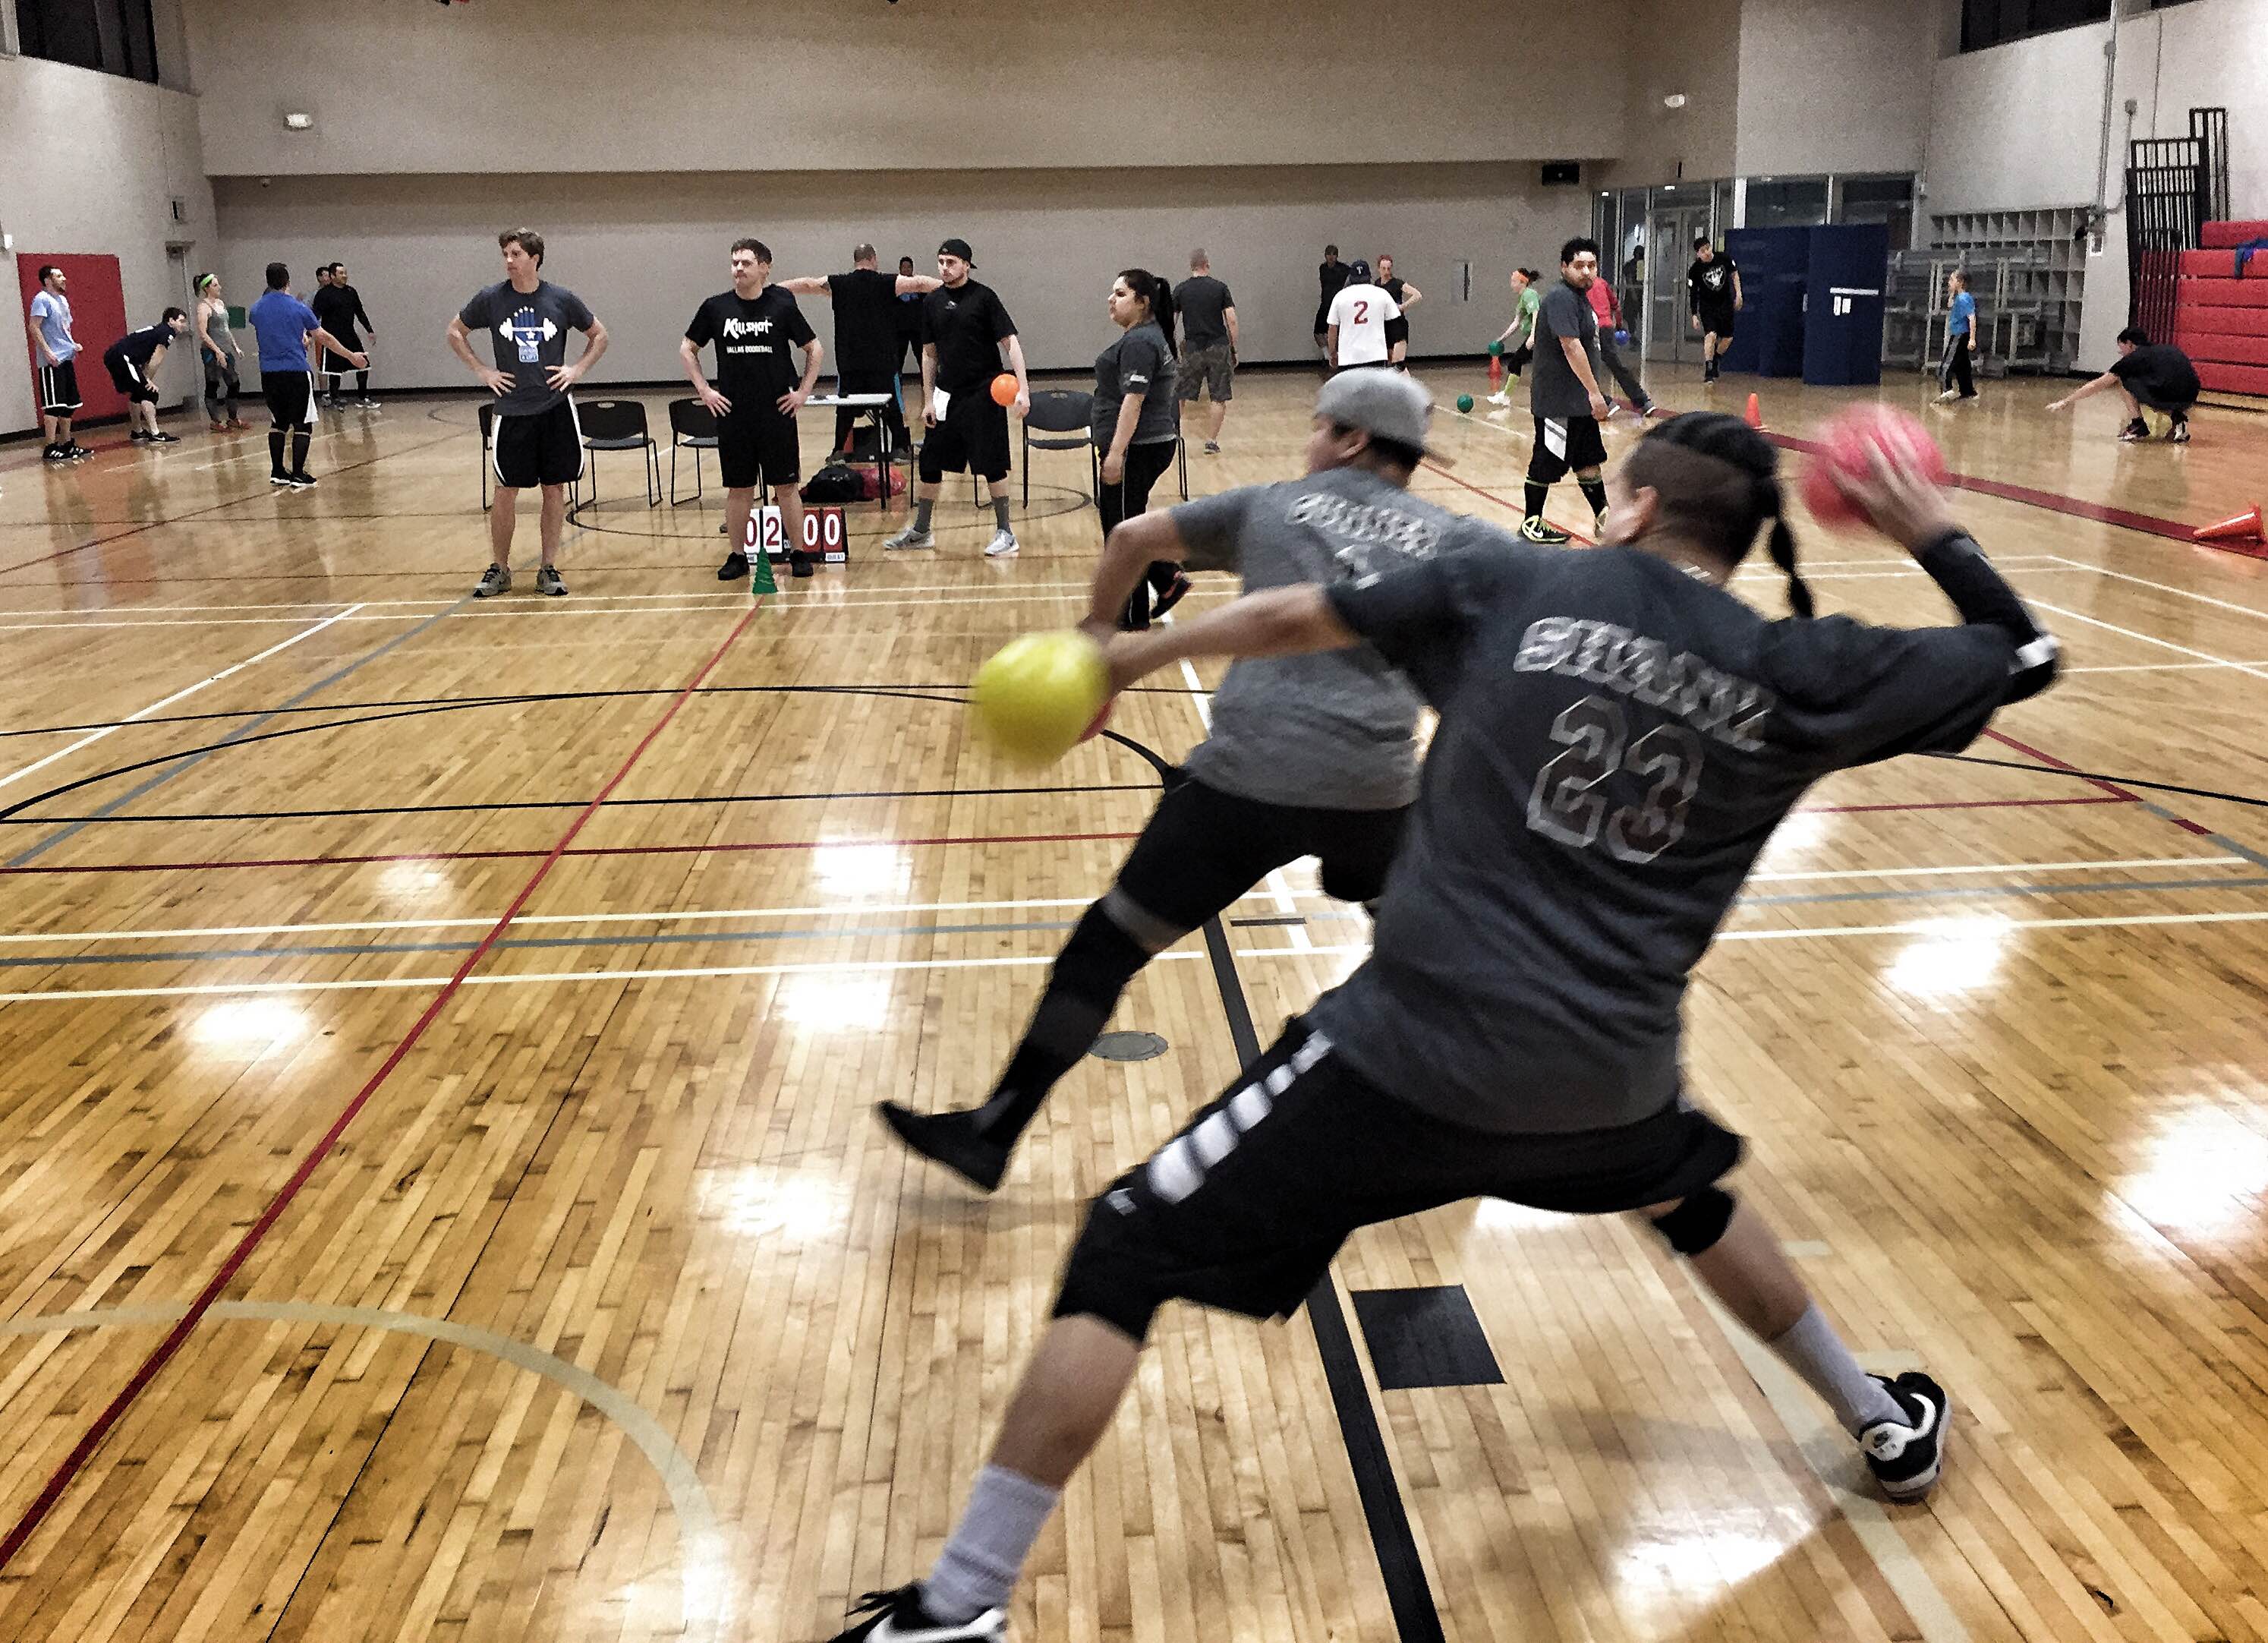 Players and teams are sought for Dodgeball Dallas.